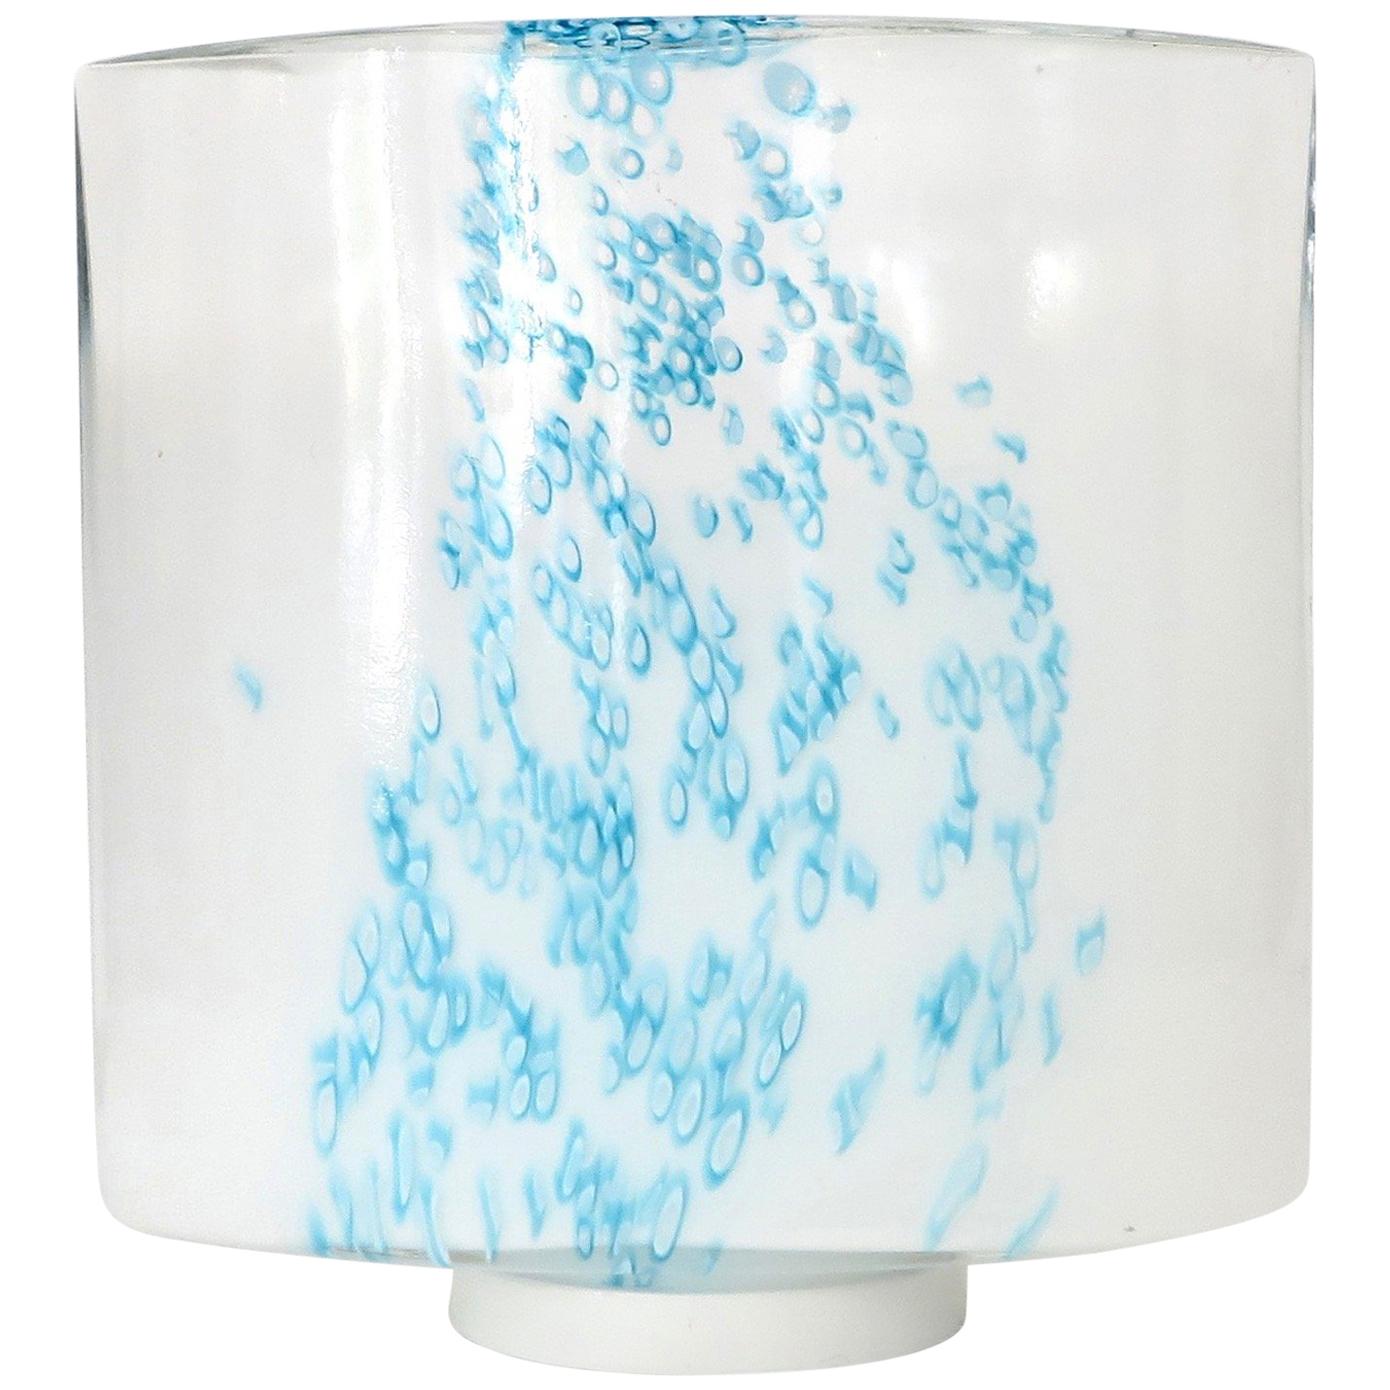 Murano Glass Table Lamp by Leucos Opaque Glass Turquoise Blue Decoration